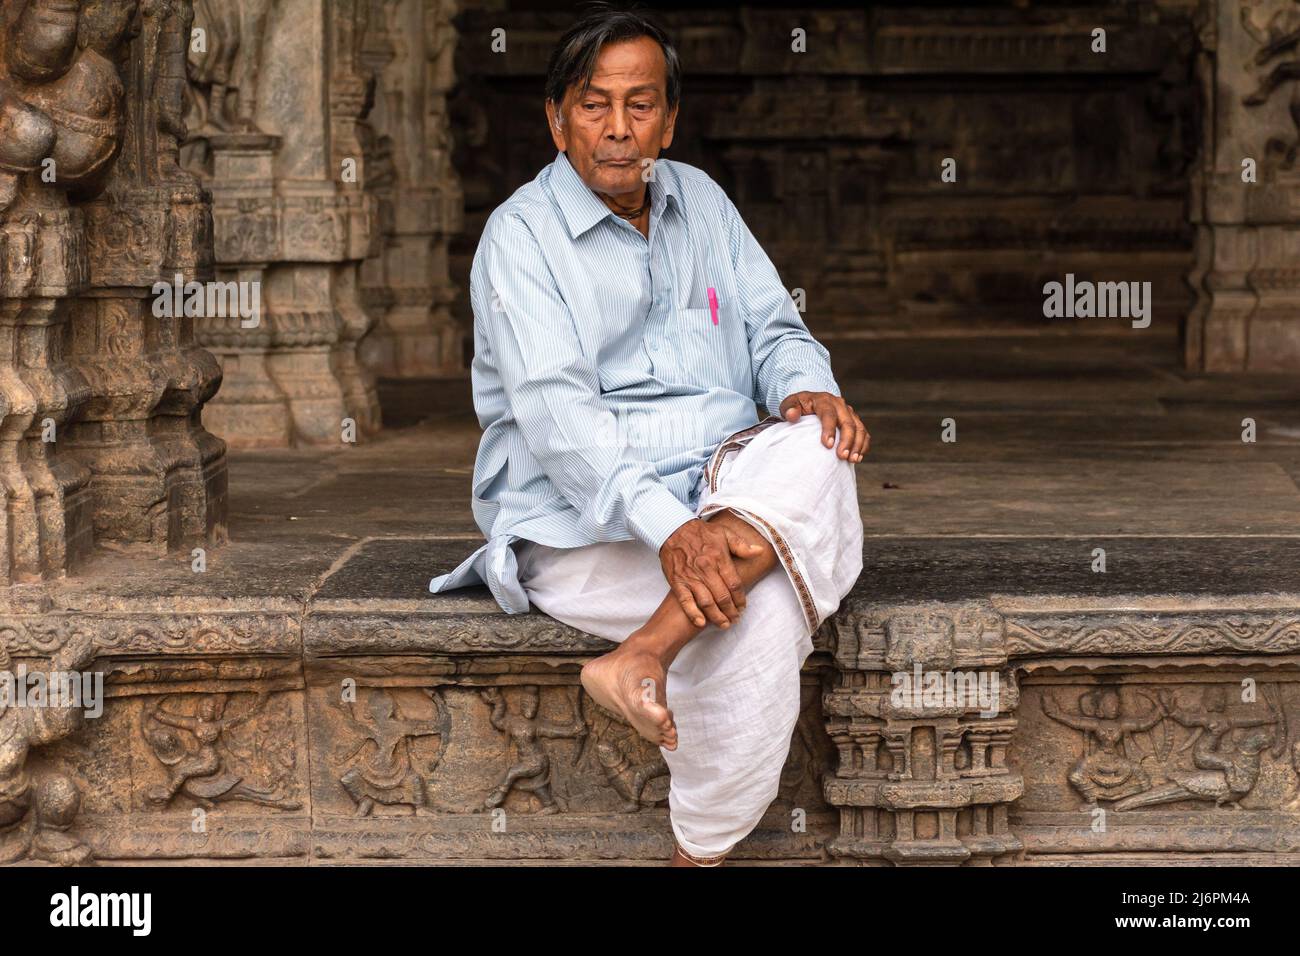 Vellore, Tamil Nadu, India - September 2018: An Indian man wearing a shirt and dhoti sitting cross legged in an ancient Hindu temple in the Vellore fo Stock Photo